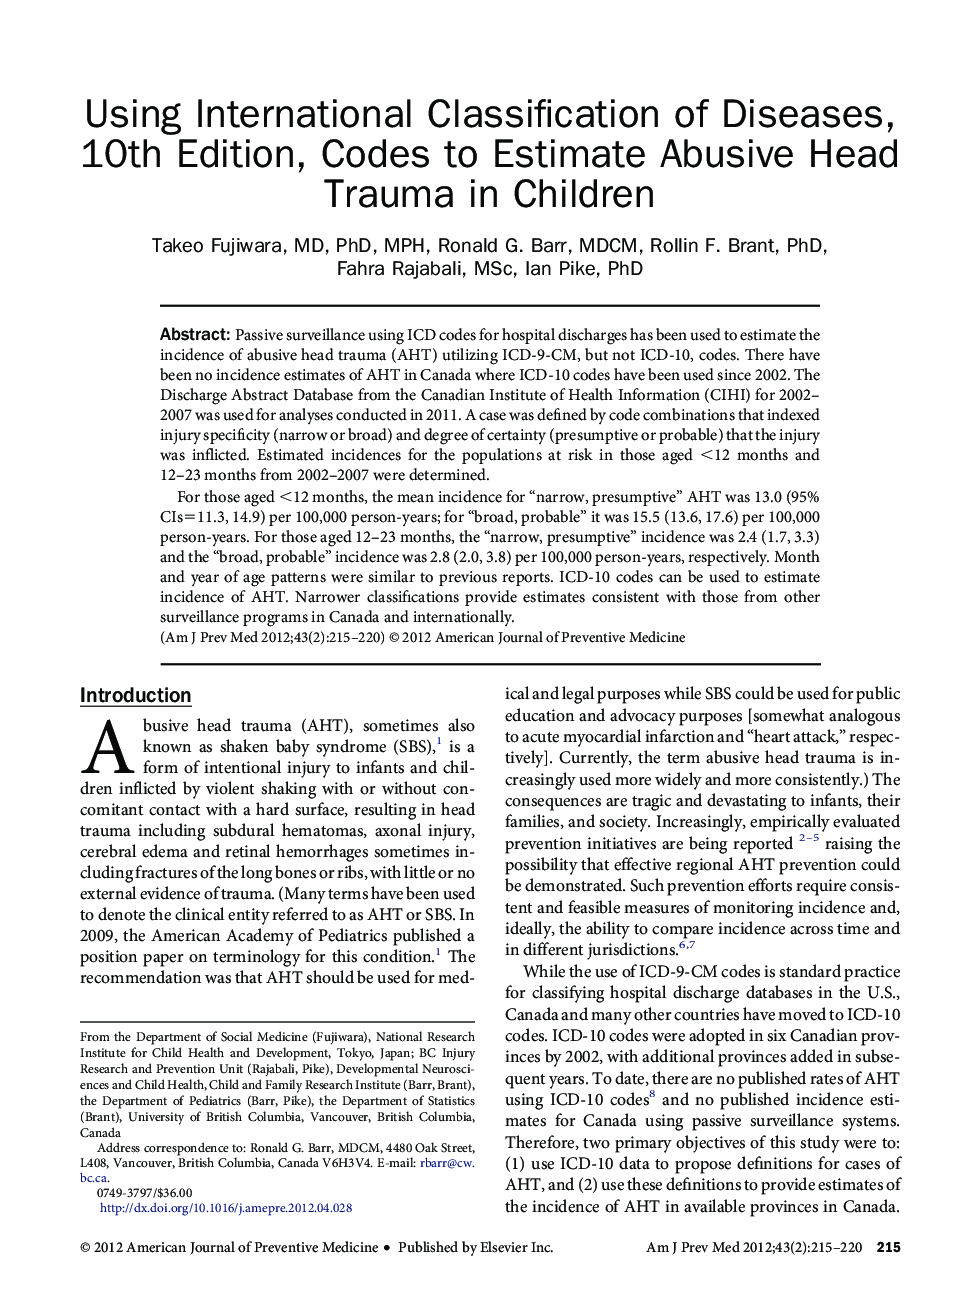 Using International Classification of Diseases, 10th Edition, Codes to Estimate Abusive Head Trauma in Children